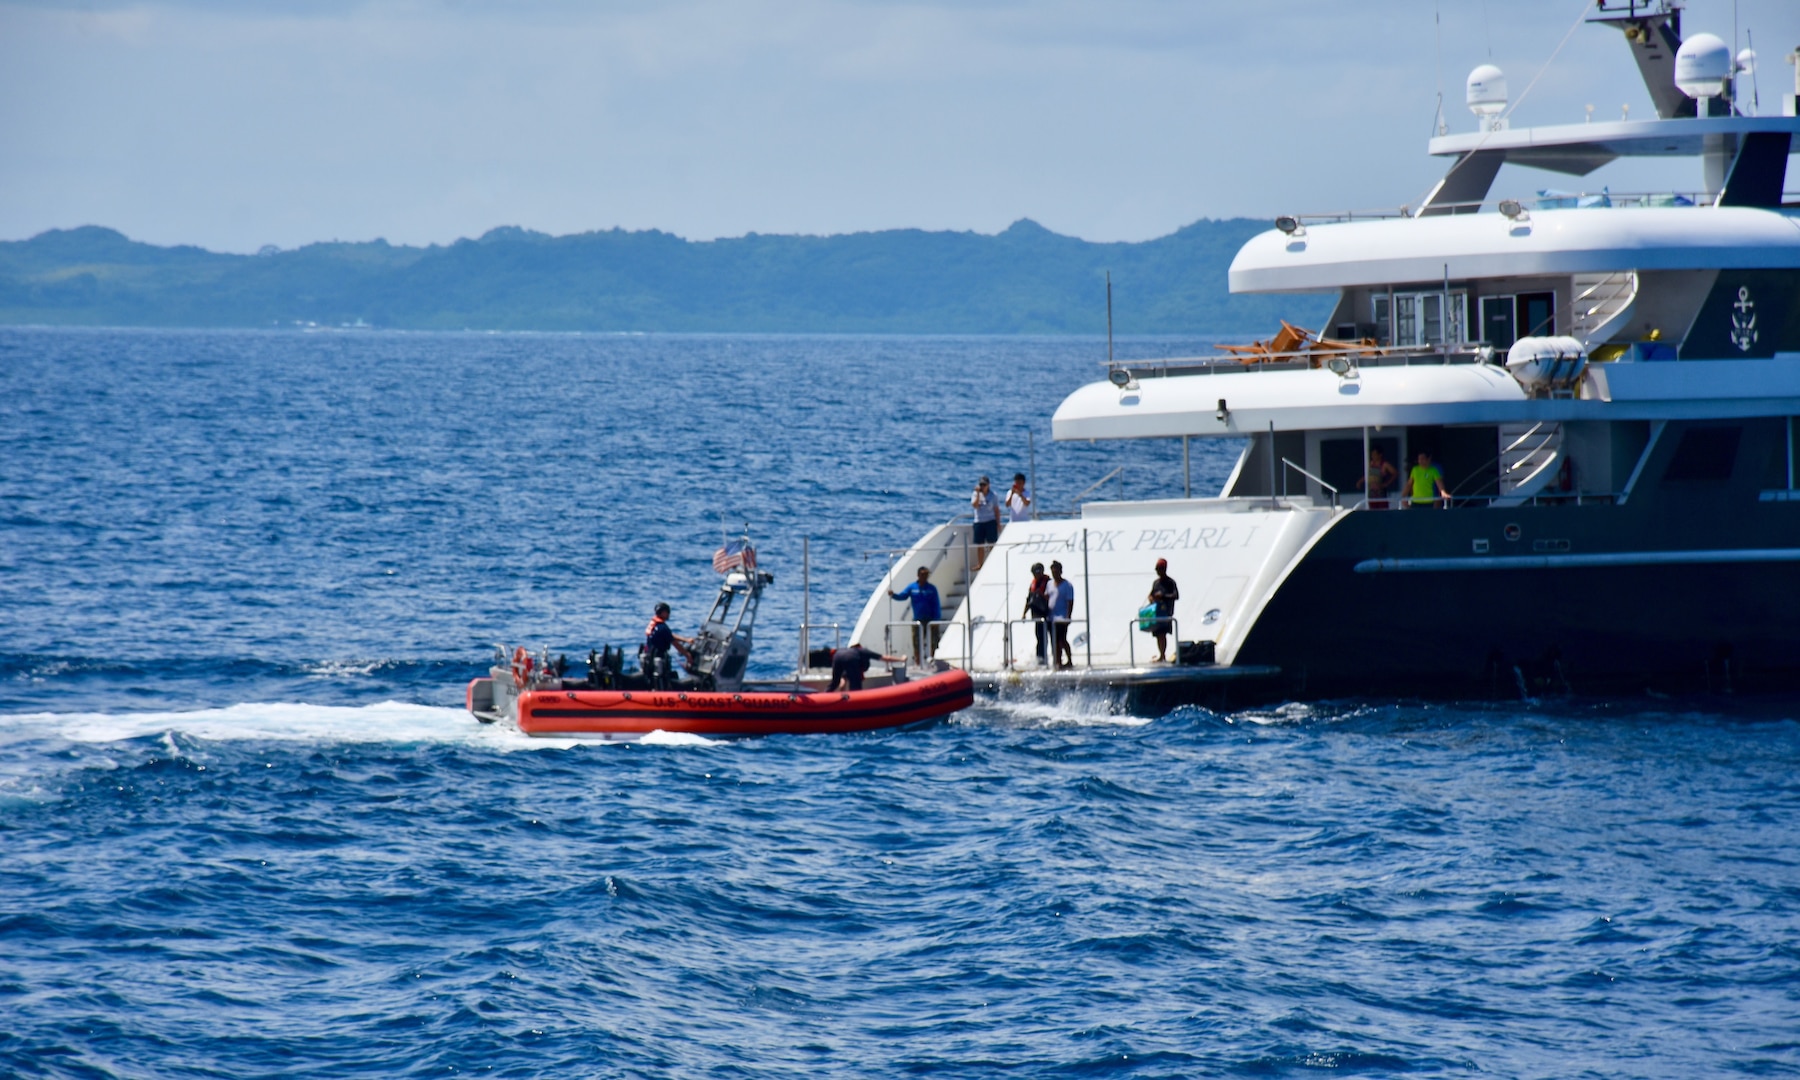 The crew of the USCGC Oliver Henry (WPC 1140) pick up the crewmember who monitored the tow overnight aboard the Black Pearl 1 as they complete the rescue operation of the motor yacht Black Pearl 1 and the 11 crew aboard, ensuring its safe arrival and mooring in the Republic of Palau on July 22, 2024, at 11:22 a.m. ChST, the Oliver Henry crew transferred the Black Pearl's tow to the 75-foot Palau-flagged tug SSC Techall, just offshore Palau. (U.S. Coast Guard photo)